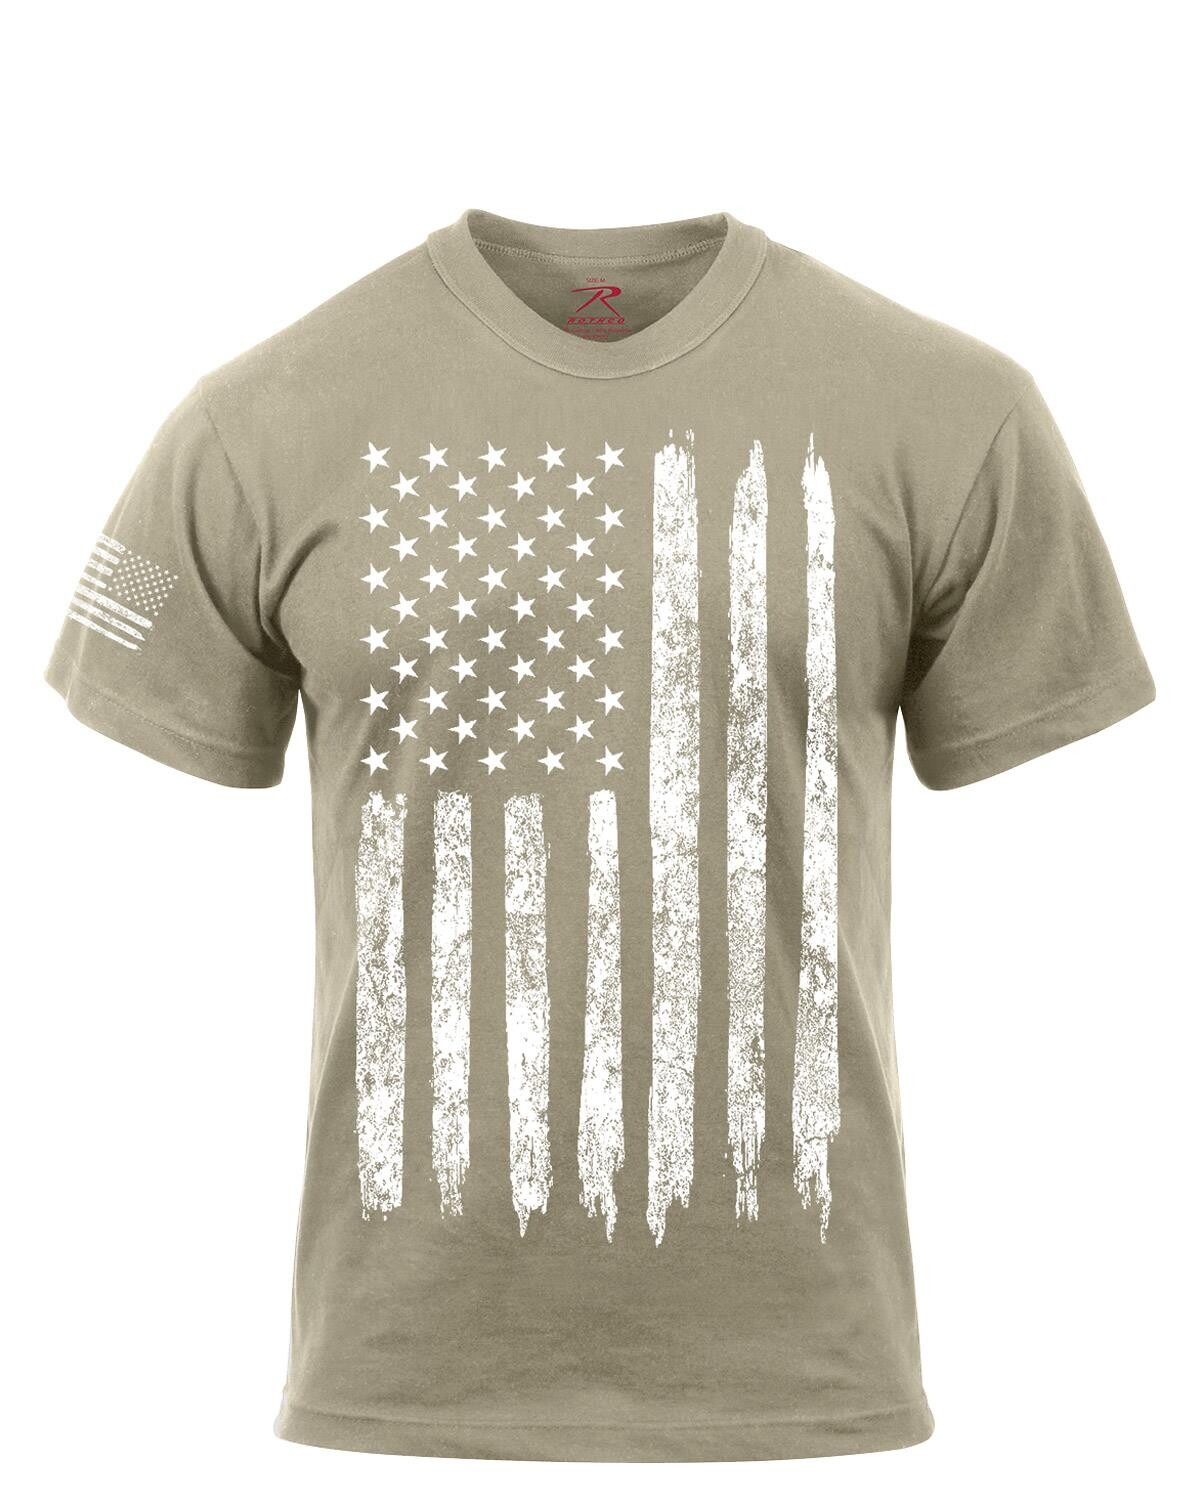 Rothco T-shirt - 'Distressed US Flag', Athletic Fit (Desert Sand, L)